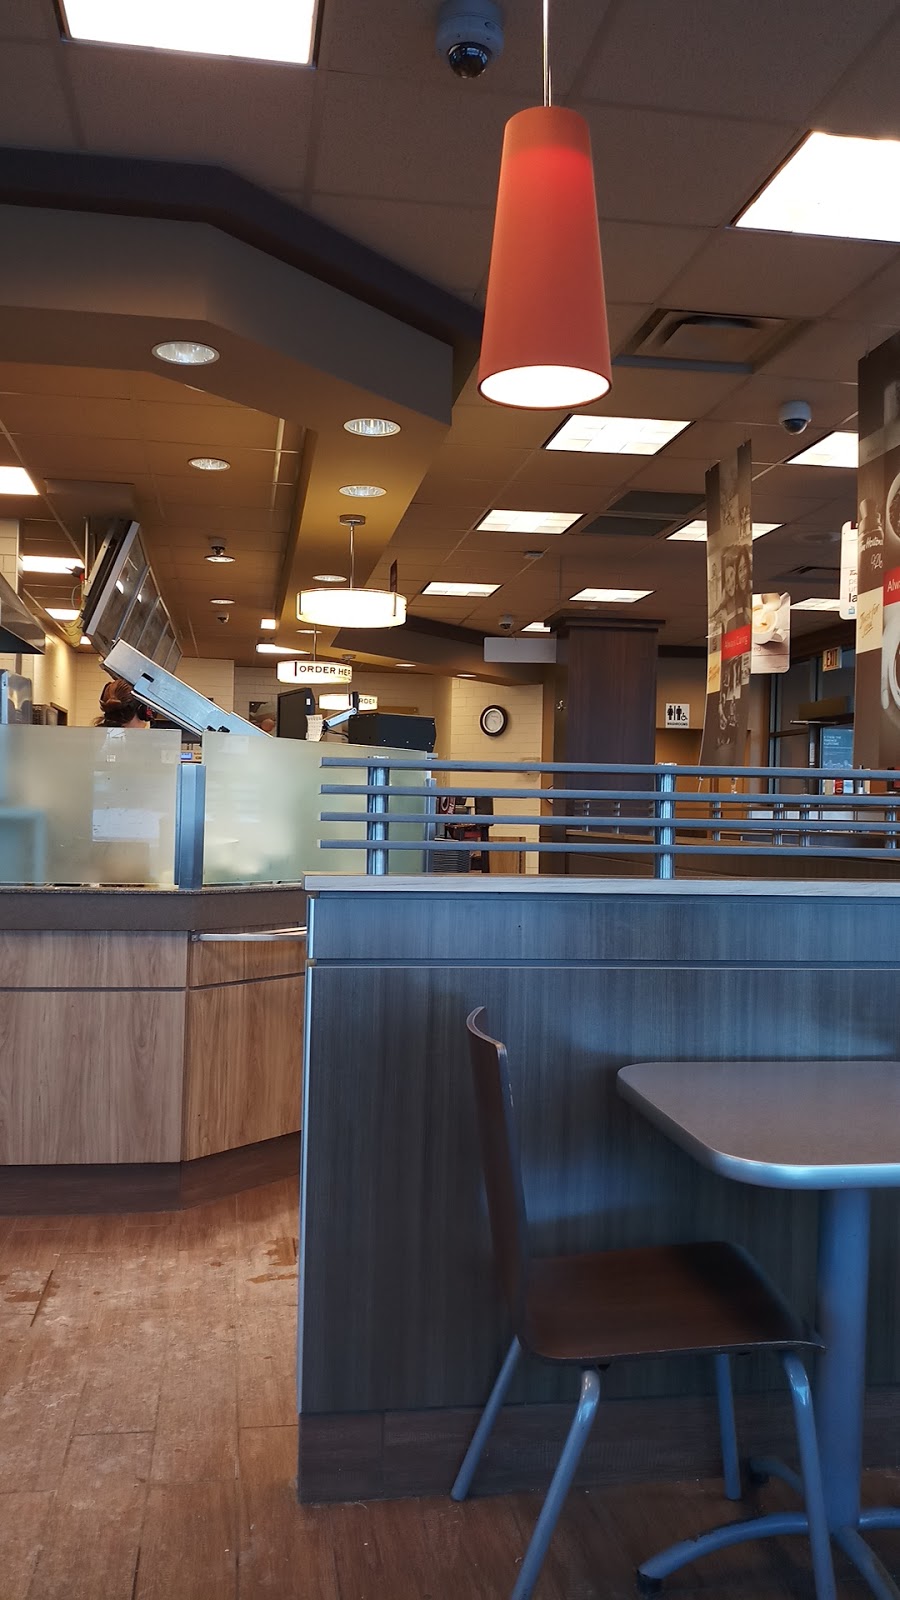 Tim Hortons | cafe | 300 Ontario St, Clinton, ON N0M 1L0, Canada | 5194828127 OR +1 519-482-8127